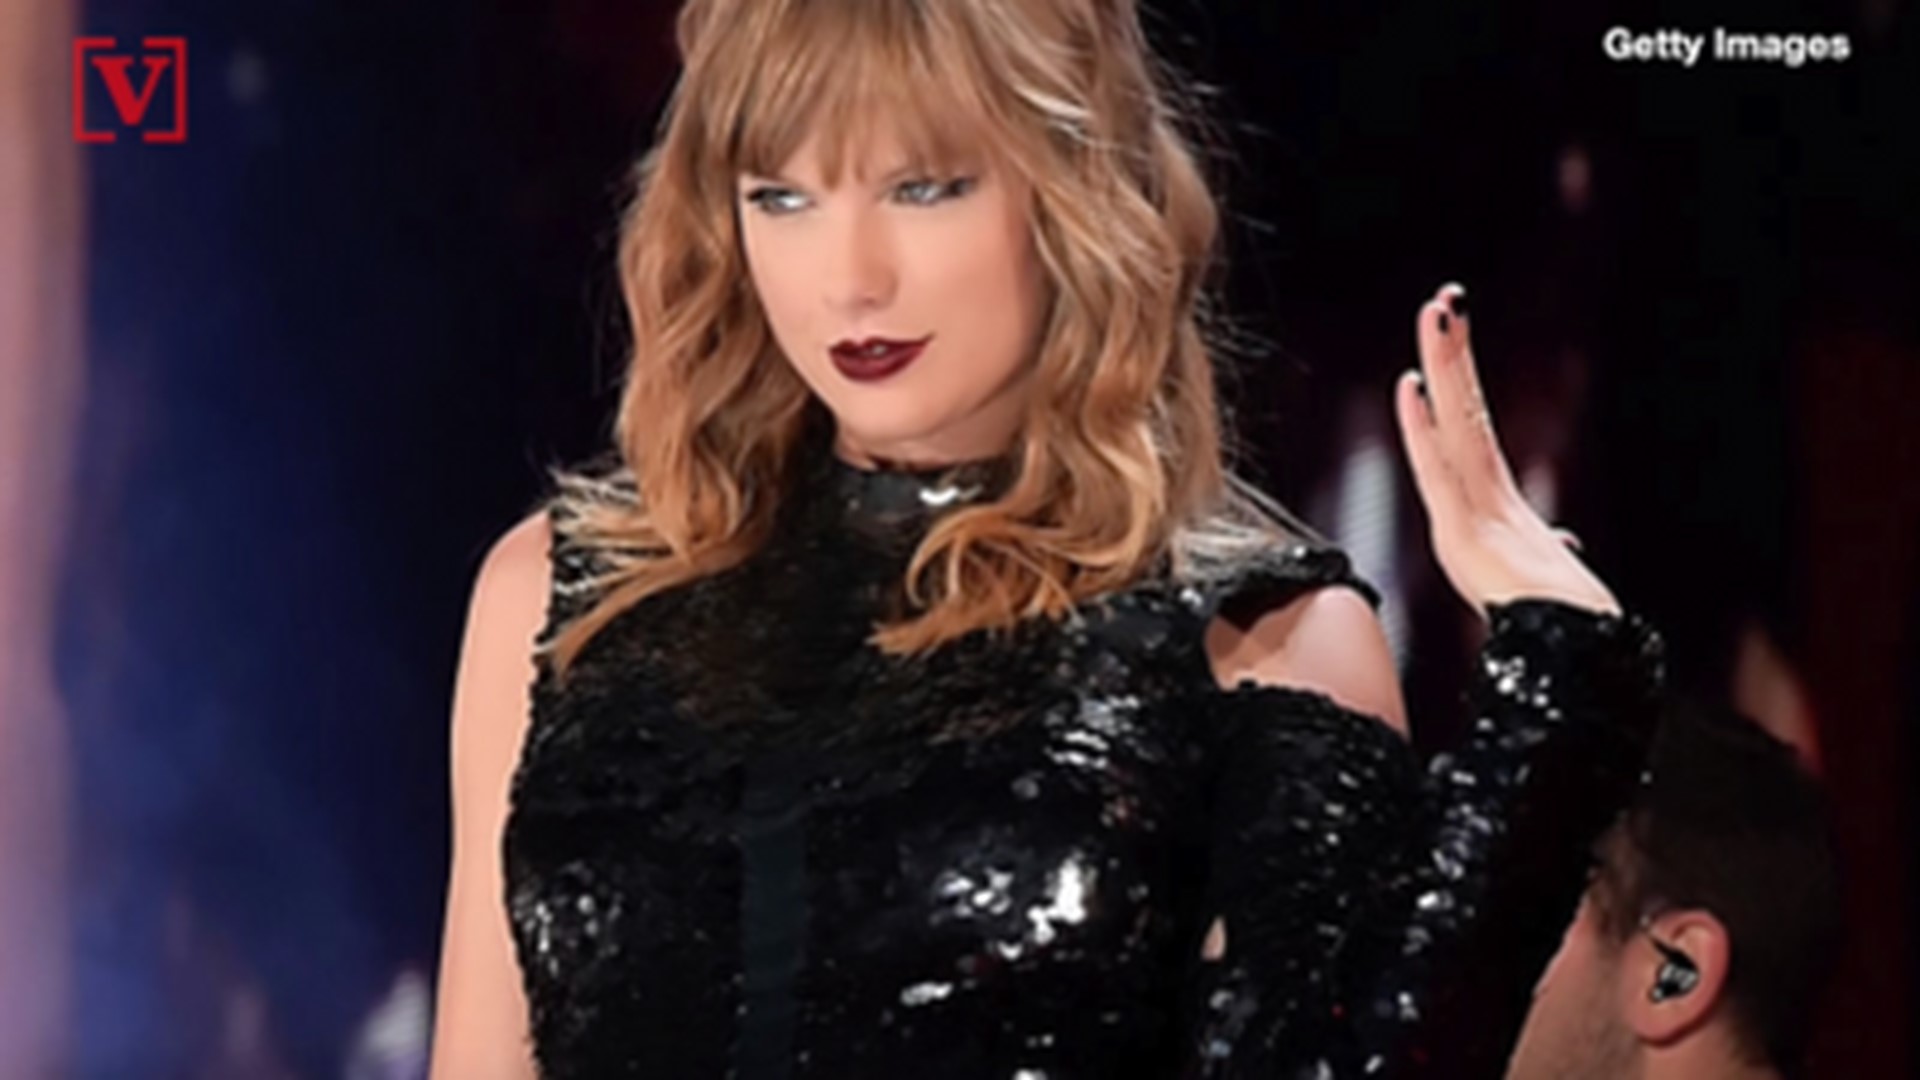 Taylor Swift reveals why she remained silent during the 2016 election.
Veuer's Aaron Dickens reports.